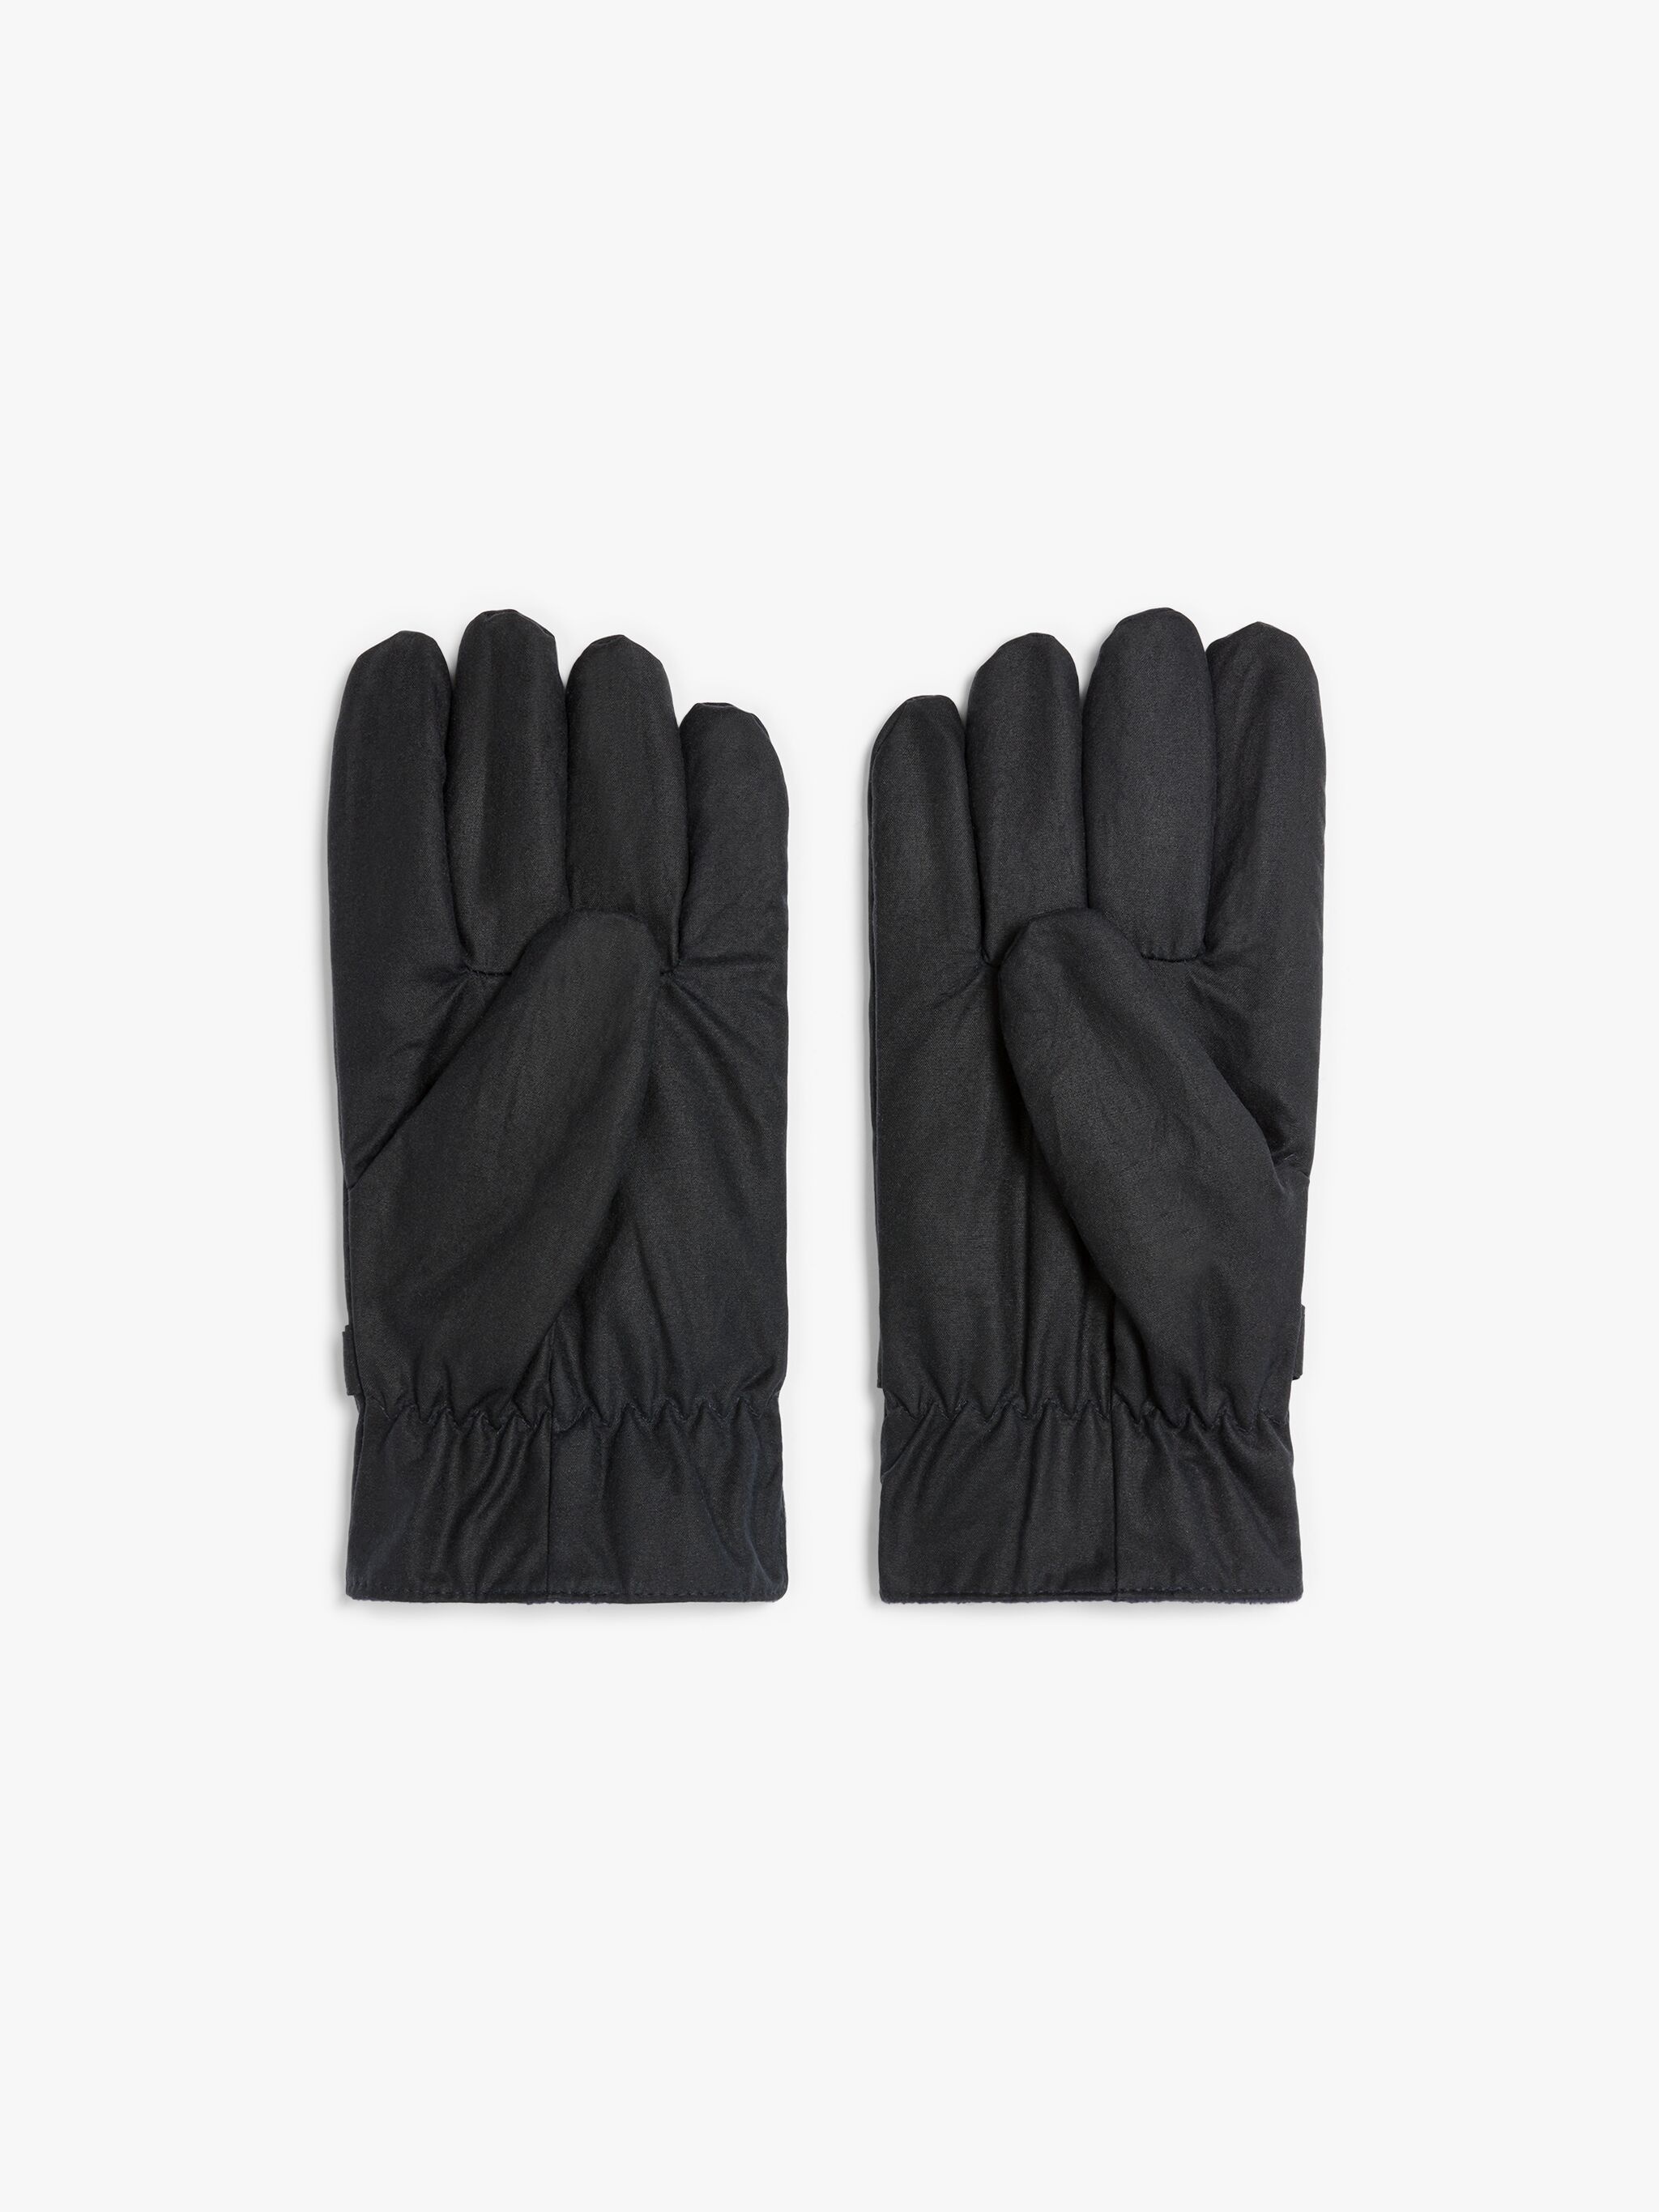 NAVY WAXED COTTON GLOVES - 3